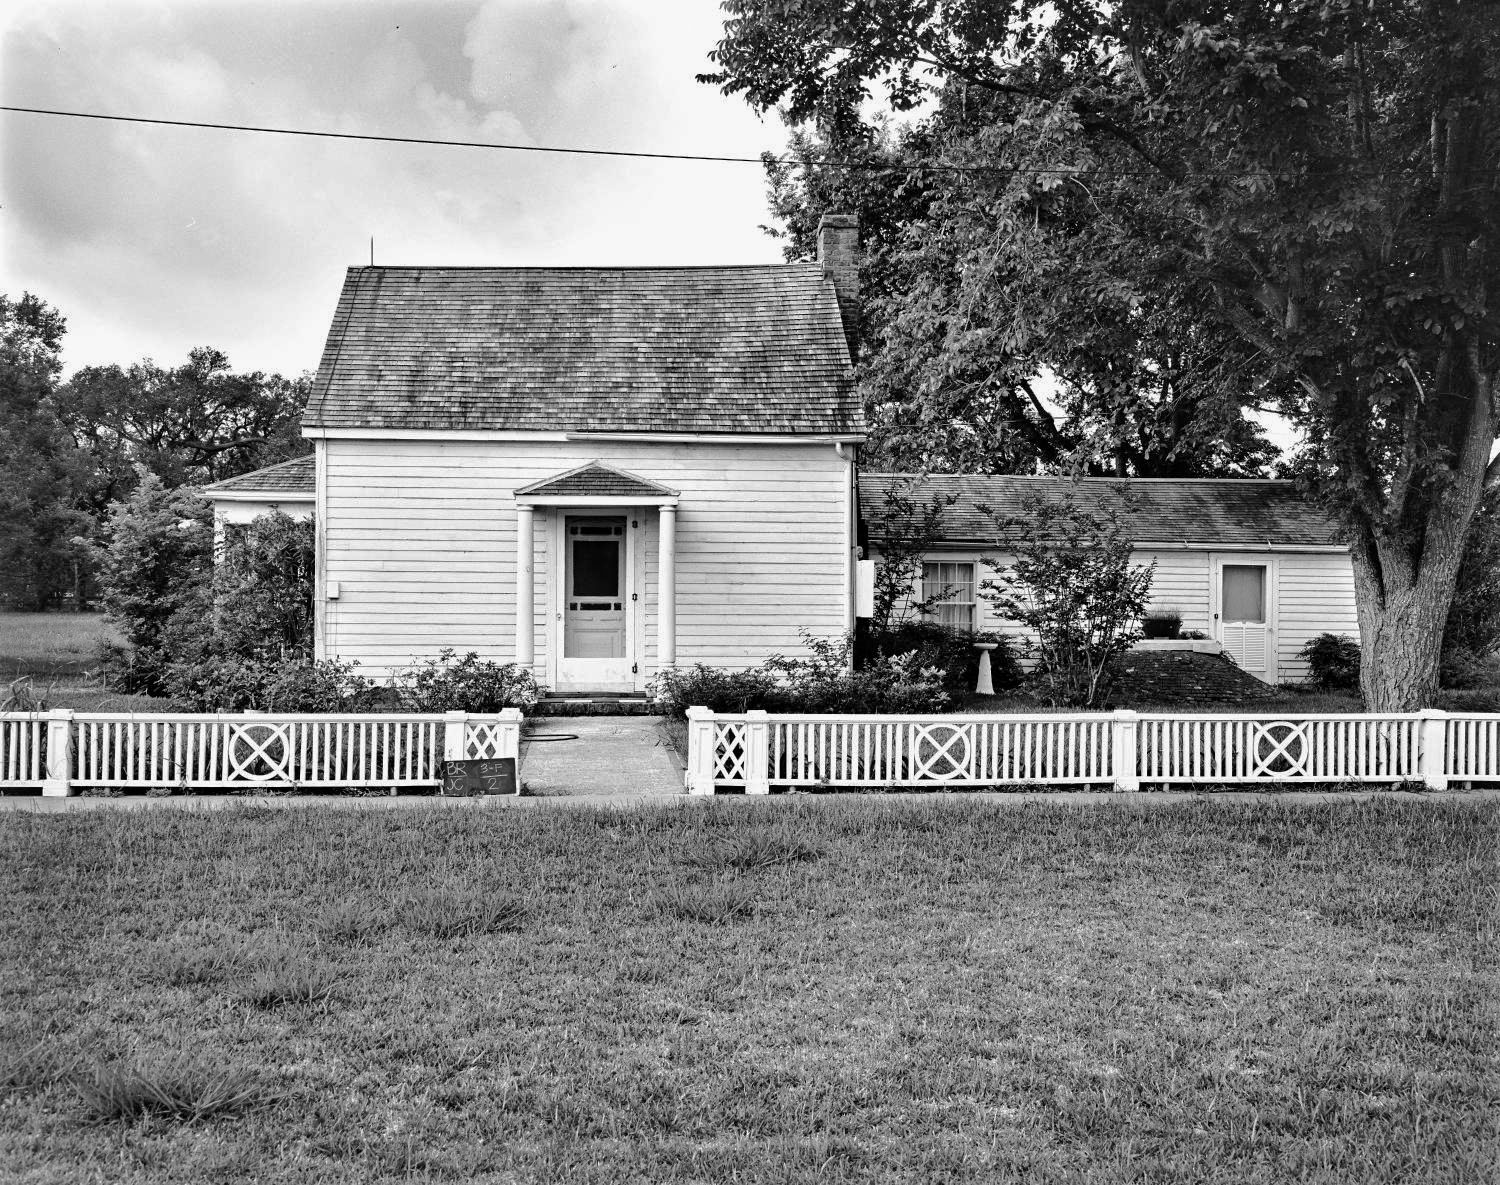 House with white siding and gray shingled roof, wooden fence, trees, and grass